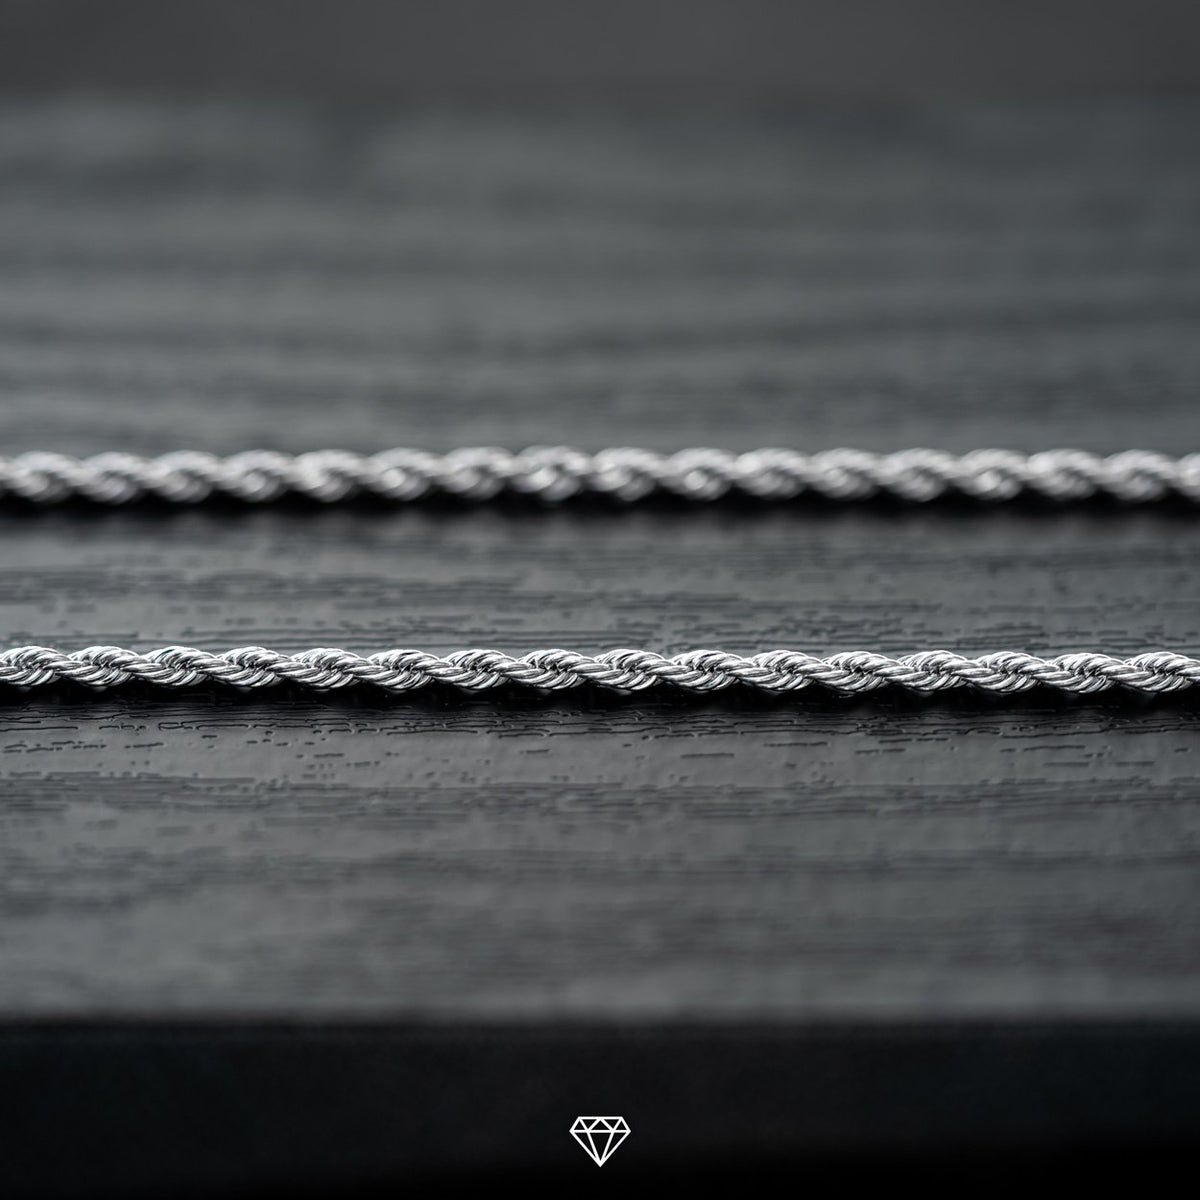 ROPE CHAIN IN WHITE GOLD (2MM)